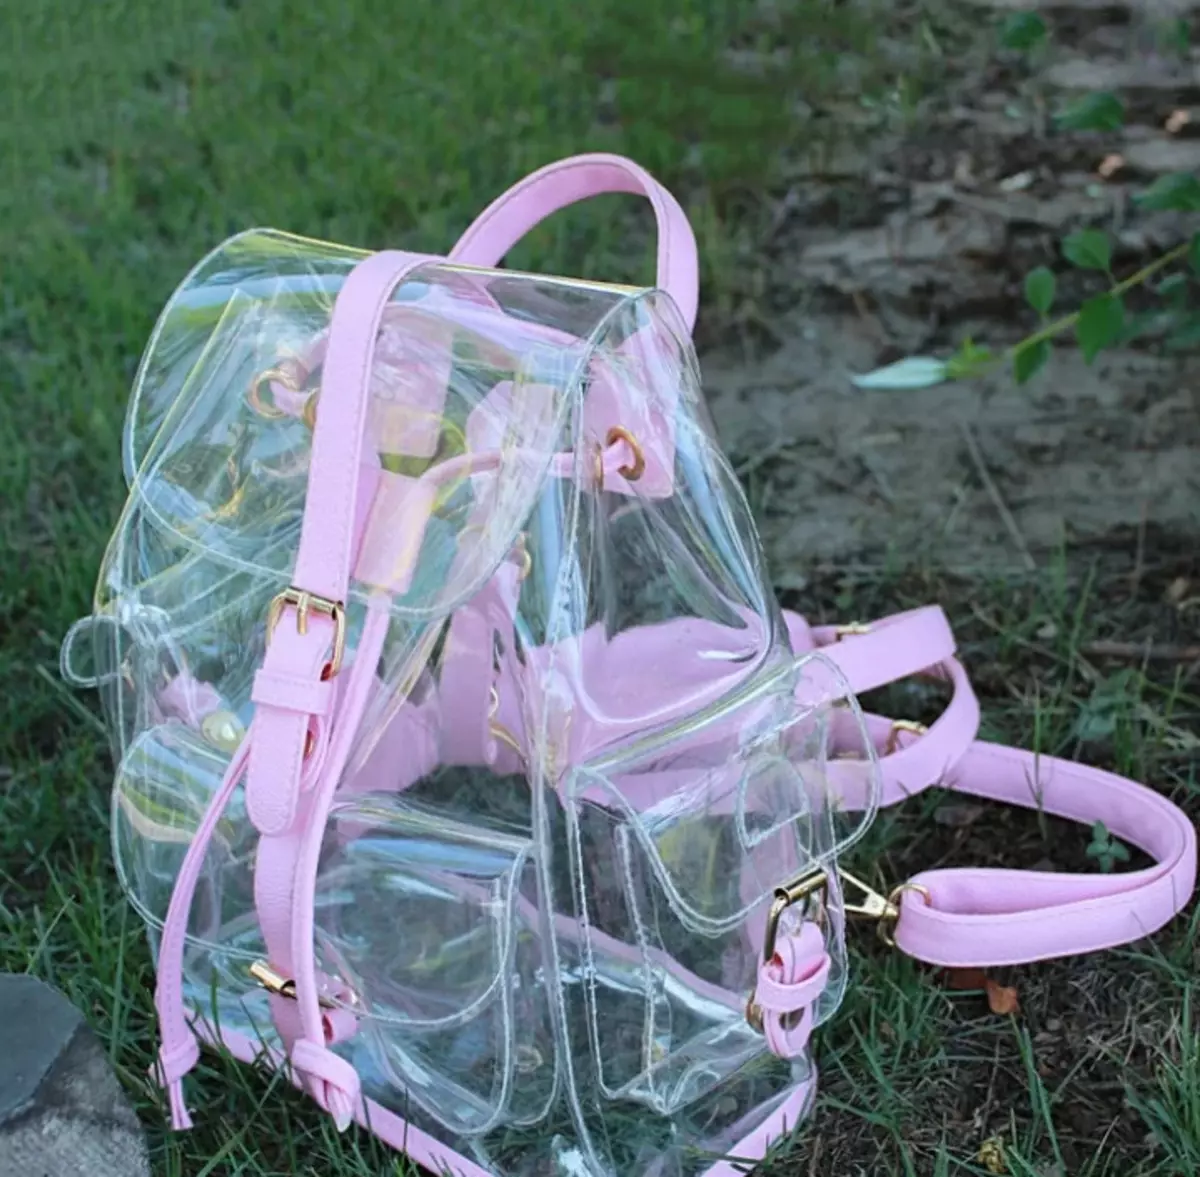 Transparent Backpacks: Little Women's Pink Translucent Models and Mini Backpacks with Sequins, White and Other Backpacks 15362_5